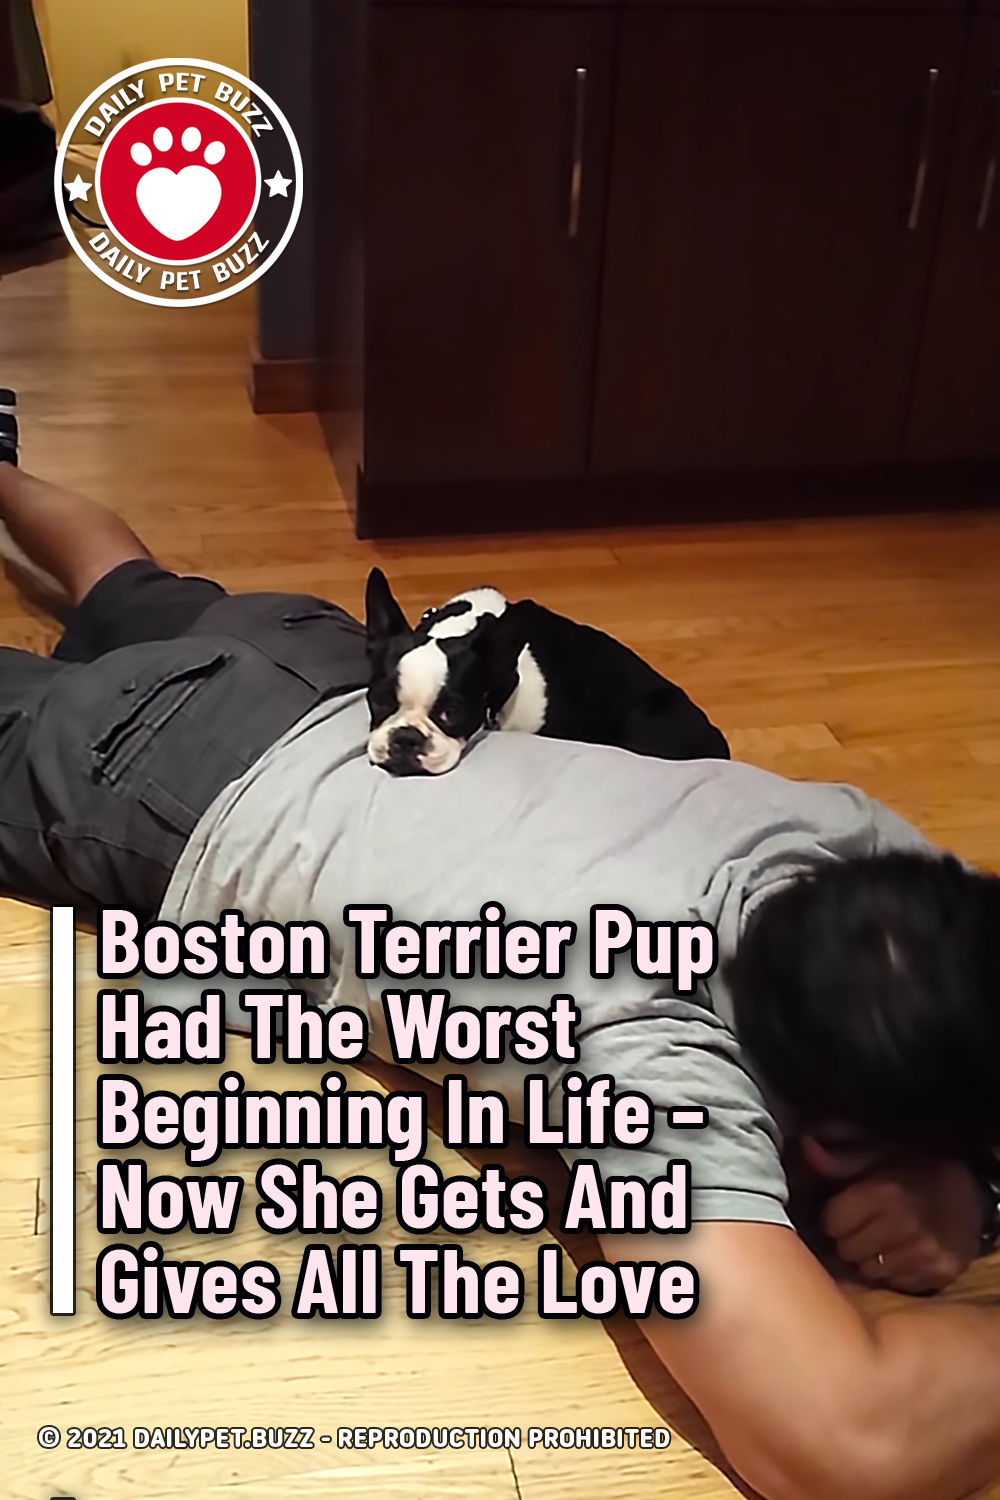 Boston Terrier Pup Had The Worst Beginning In Life – Now She Gets And Gives All The Love